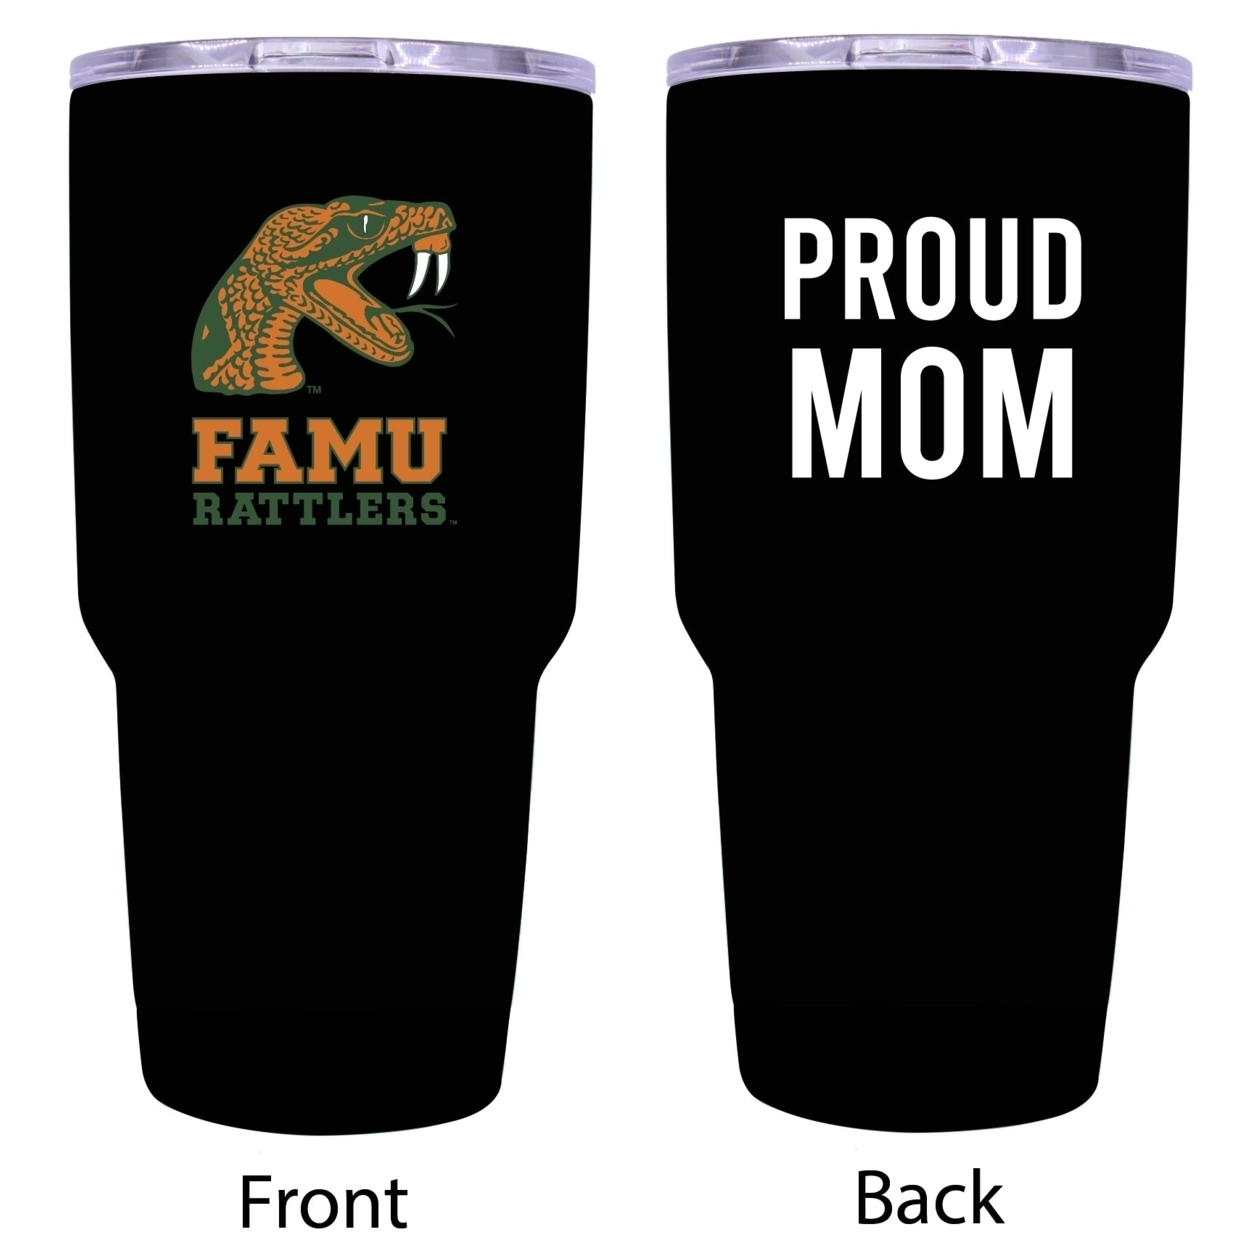 Florida A&M Rattlers Proud Mom 24 Oz Insulated Stainless Steel Tumblers Choose Your Color.